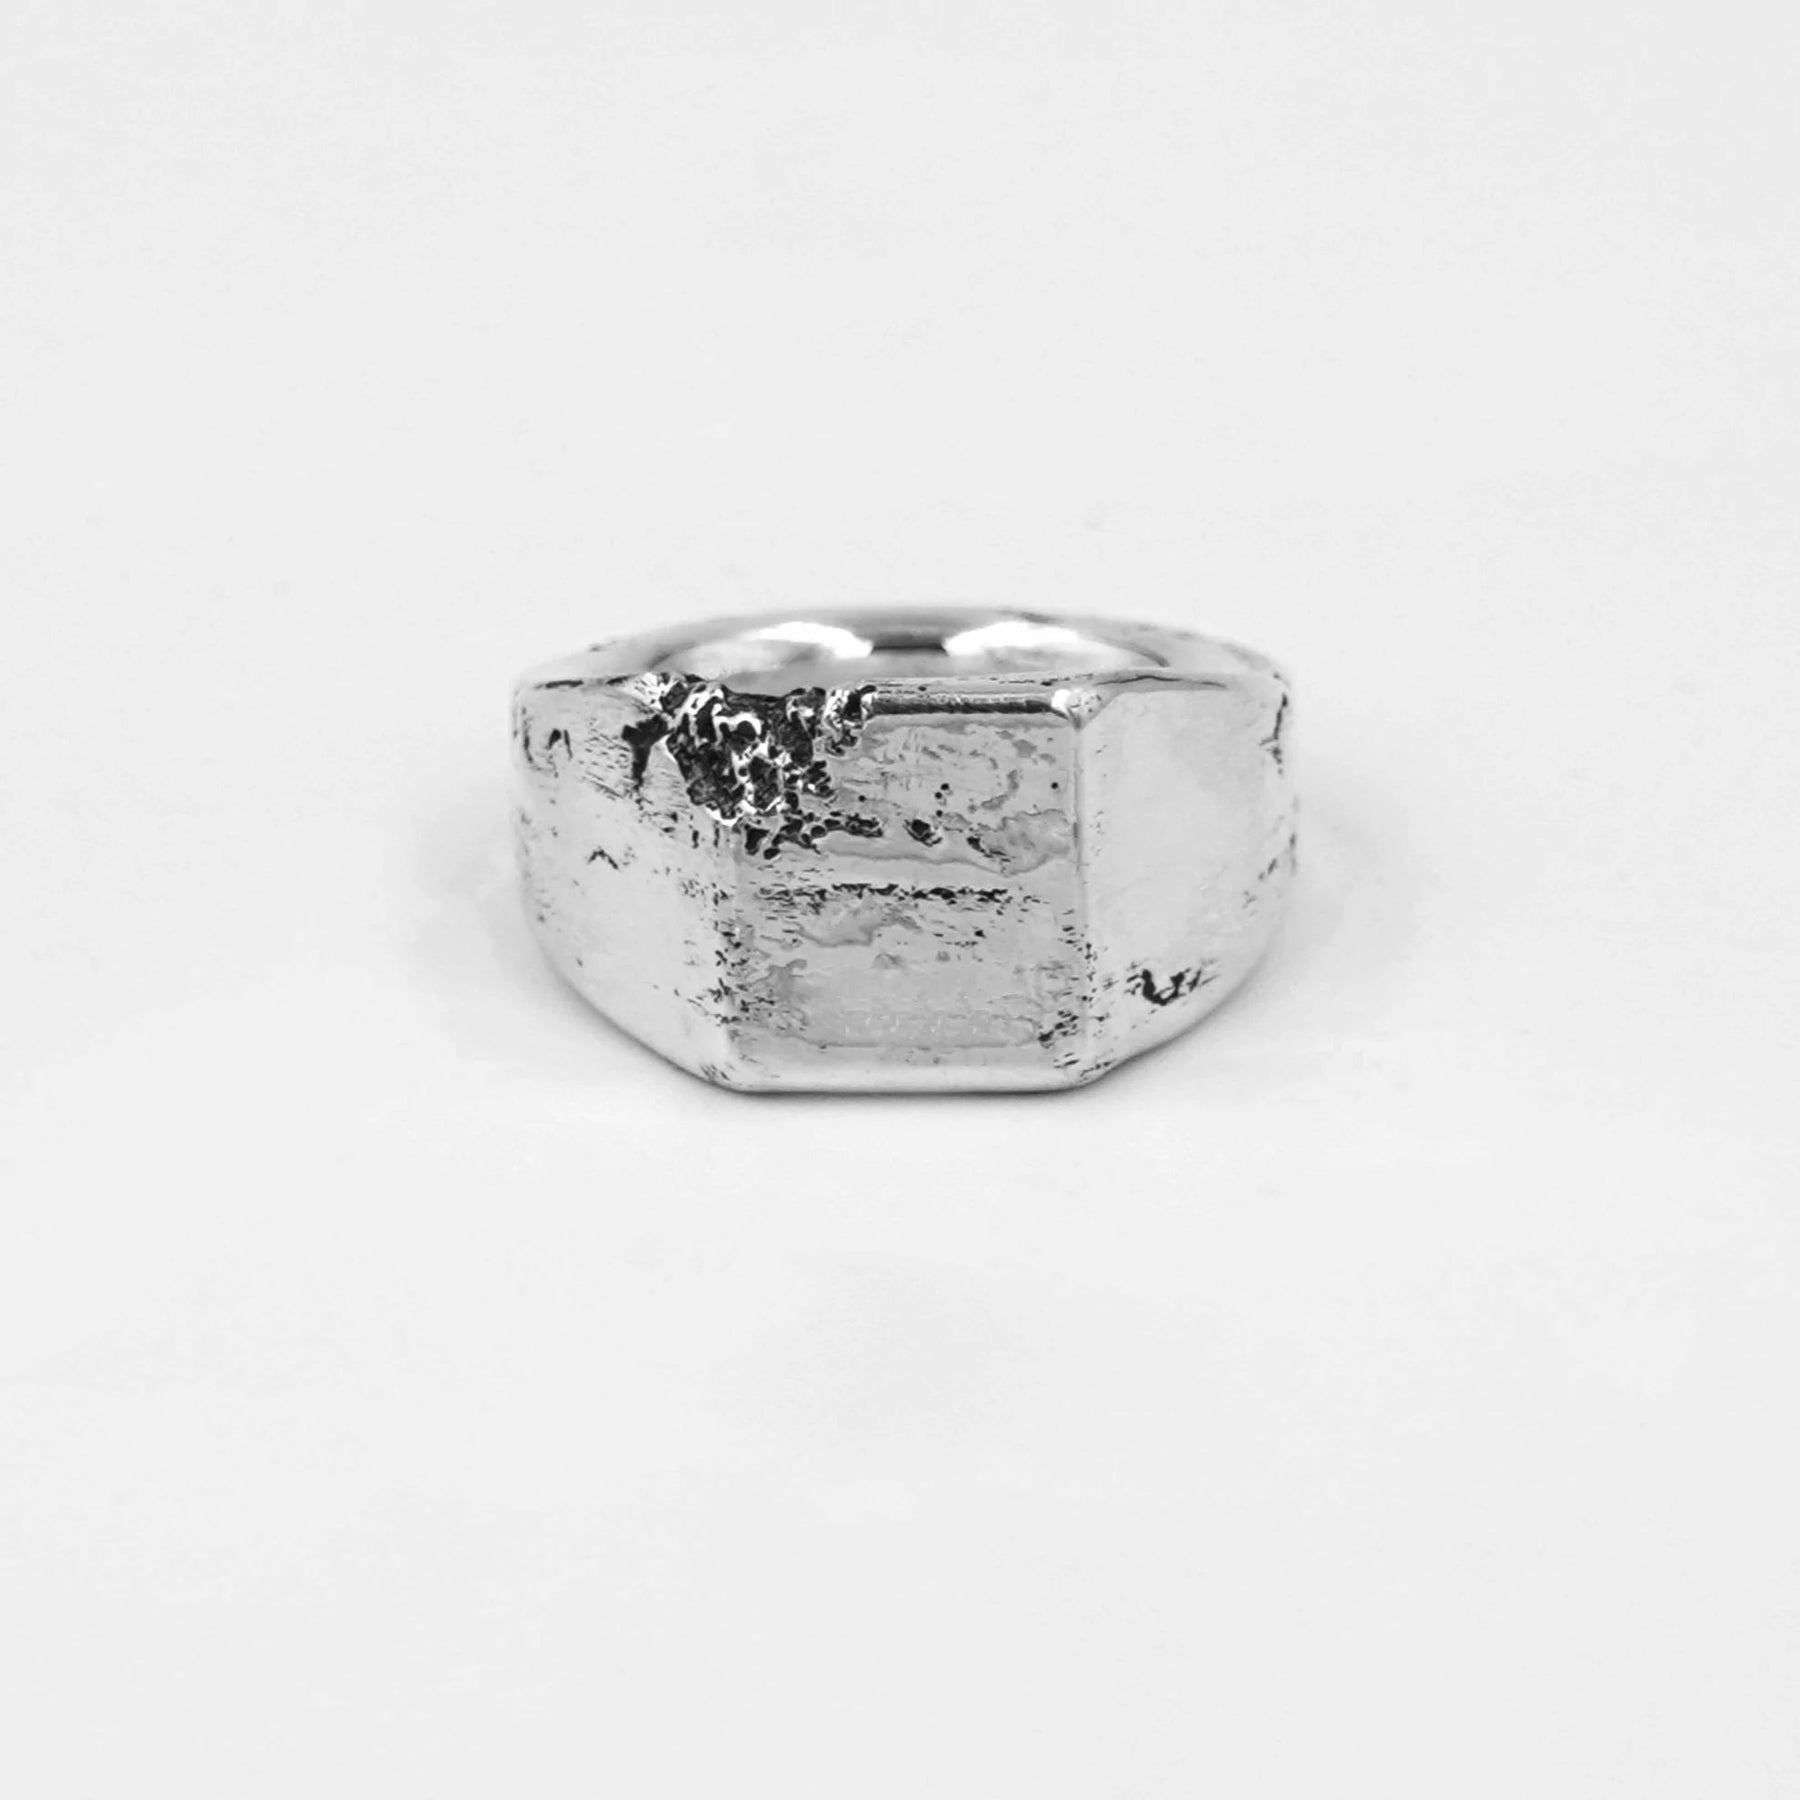 Attrition Ring - Boutee